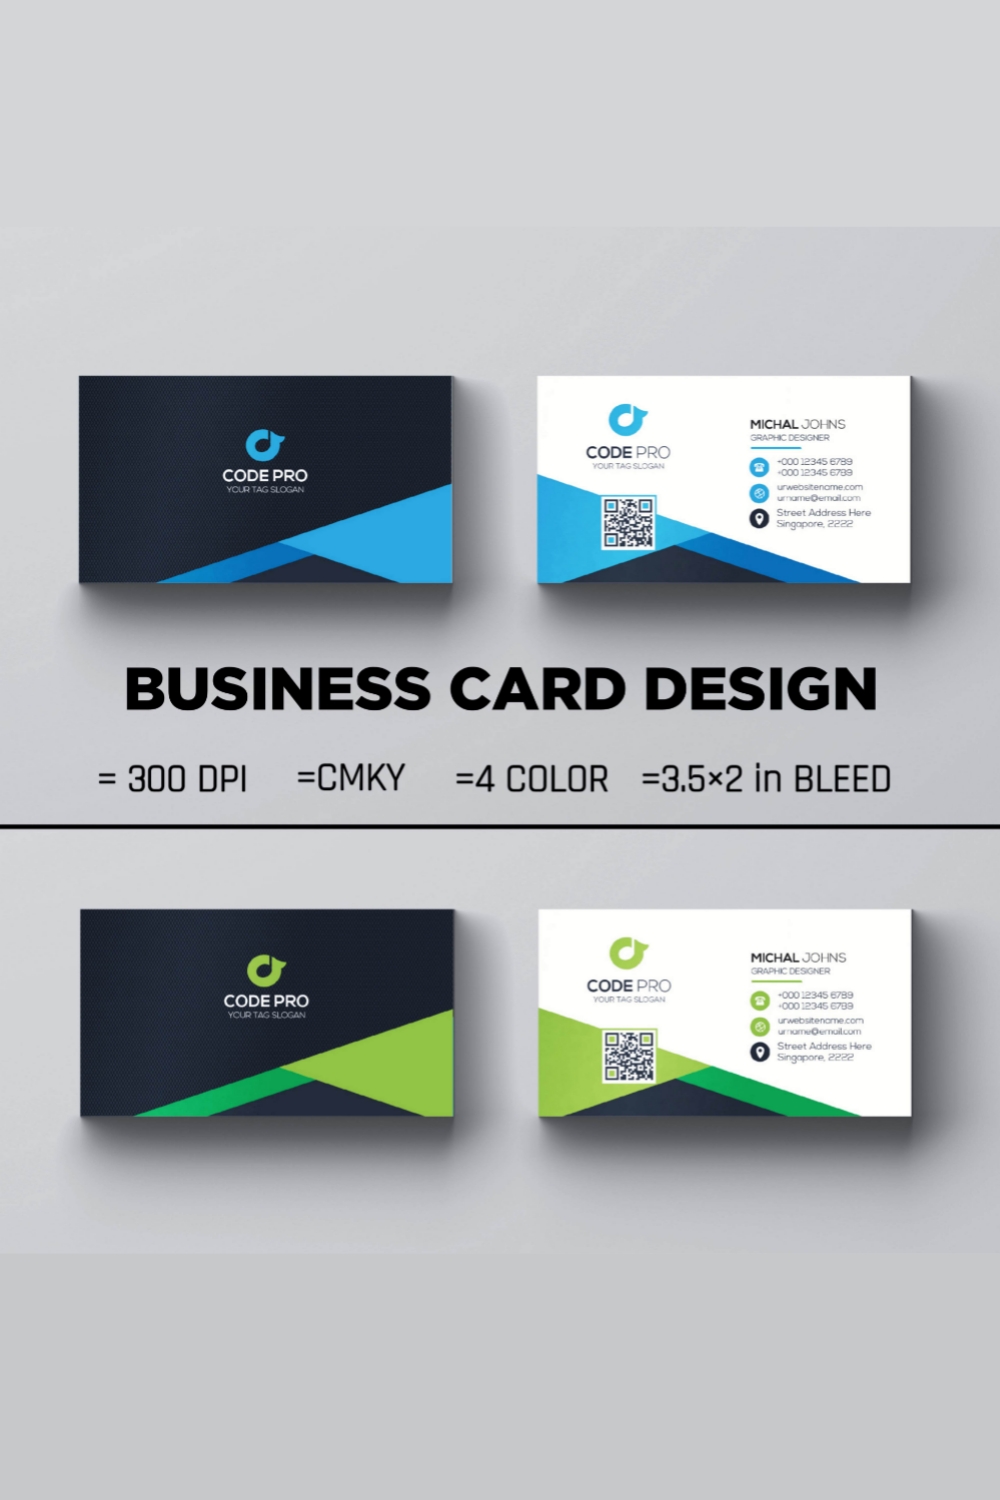 A Business Card Design template with 4 color variation pinterest preview image.